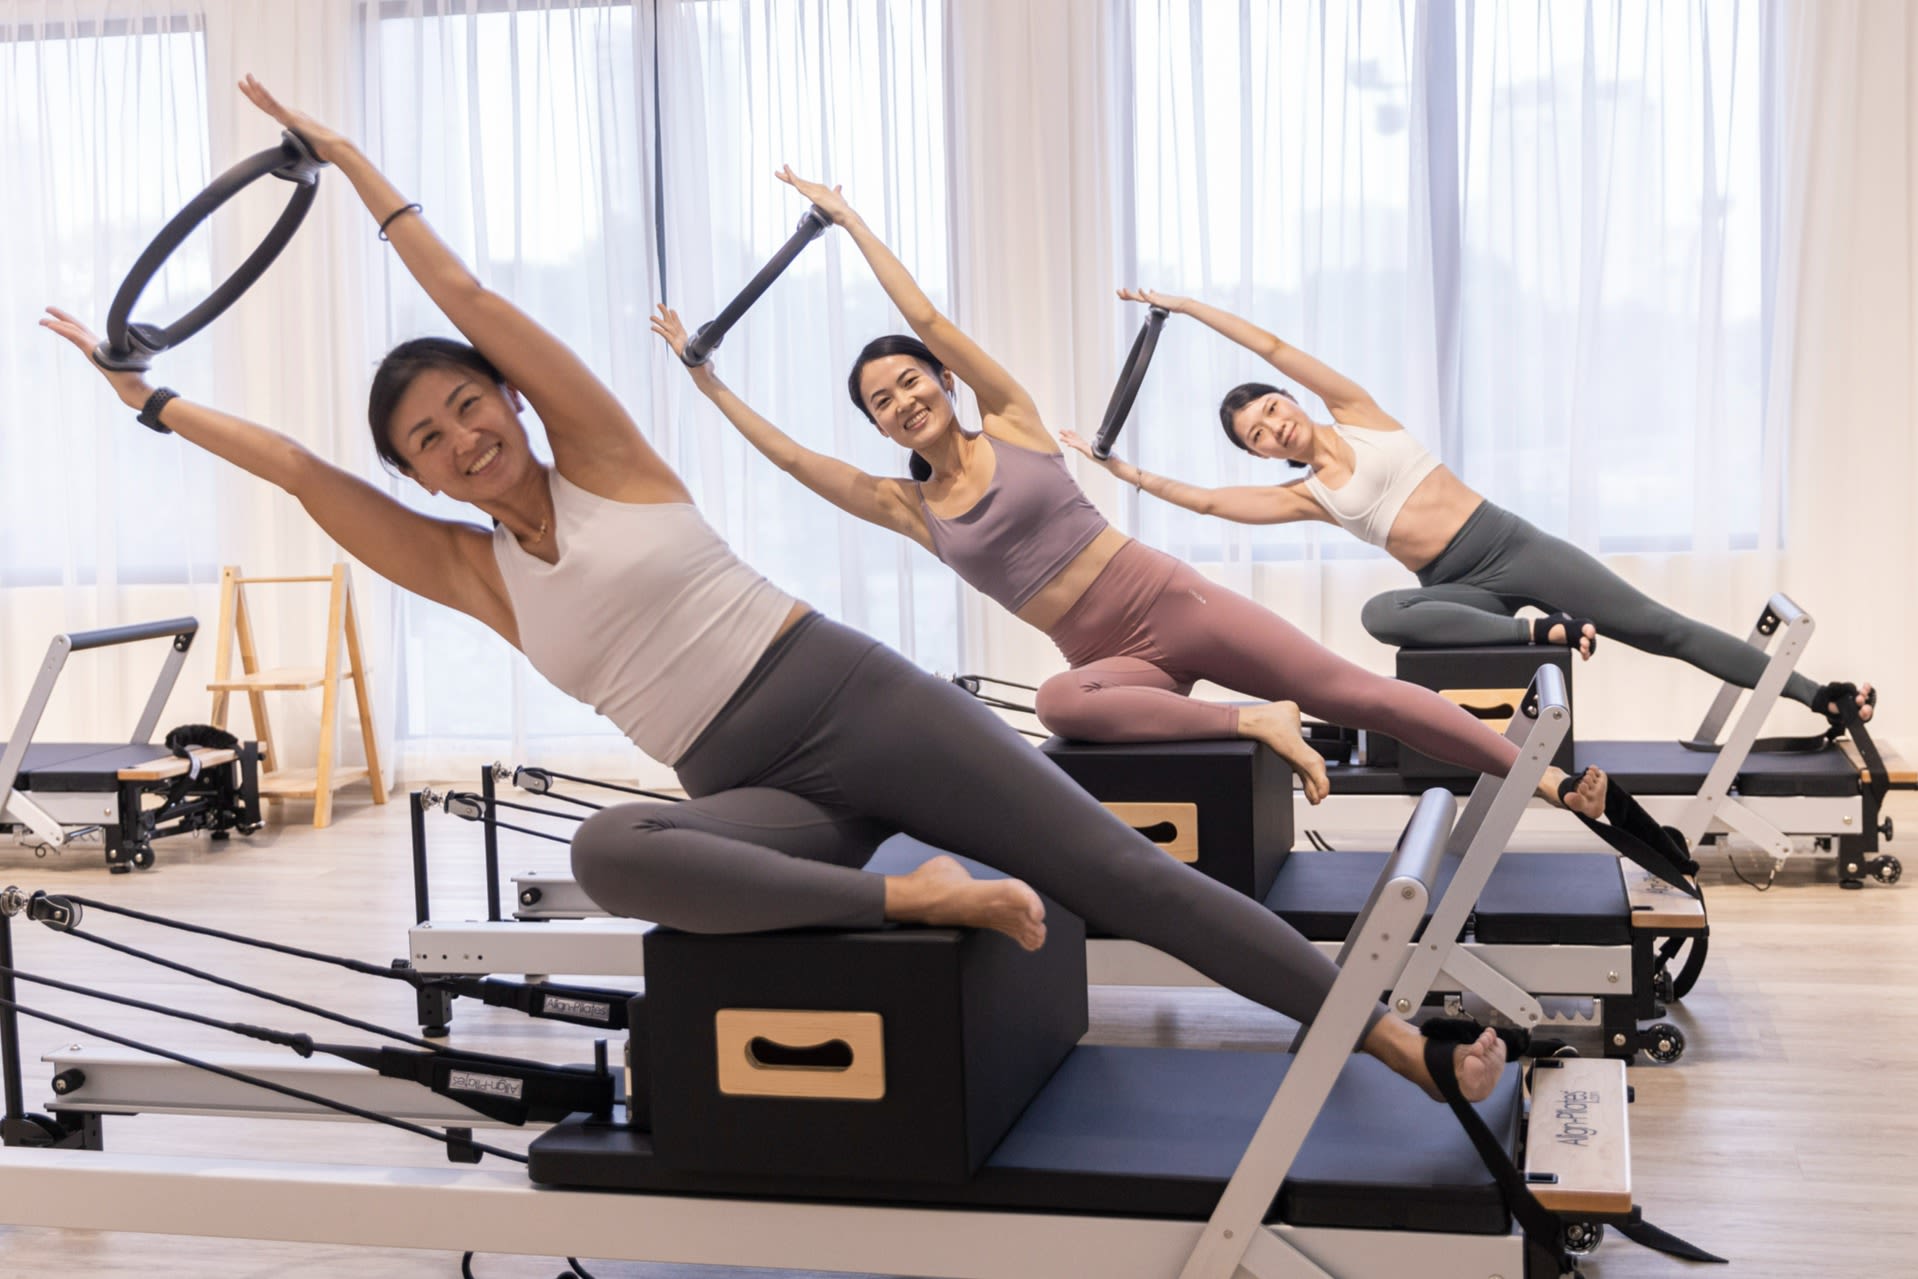 Pilates Classes In KL And Klang Valley: Location, Prices, Review